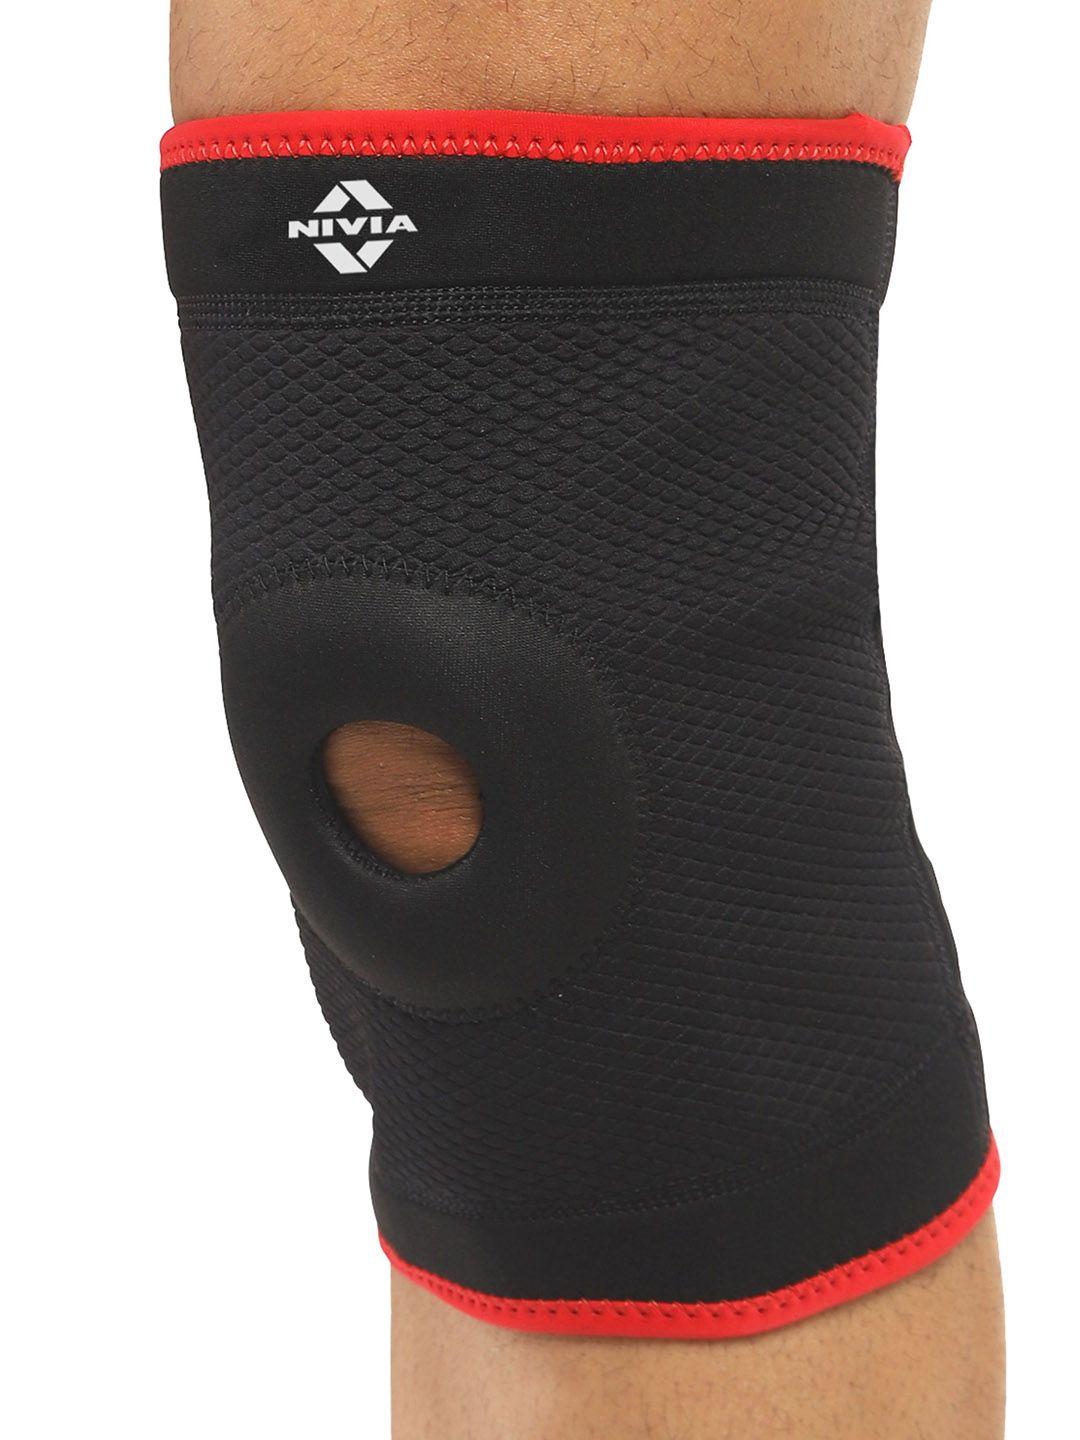 nivia orthopedic slip-in knee support with patella hole